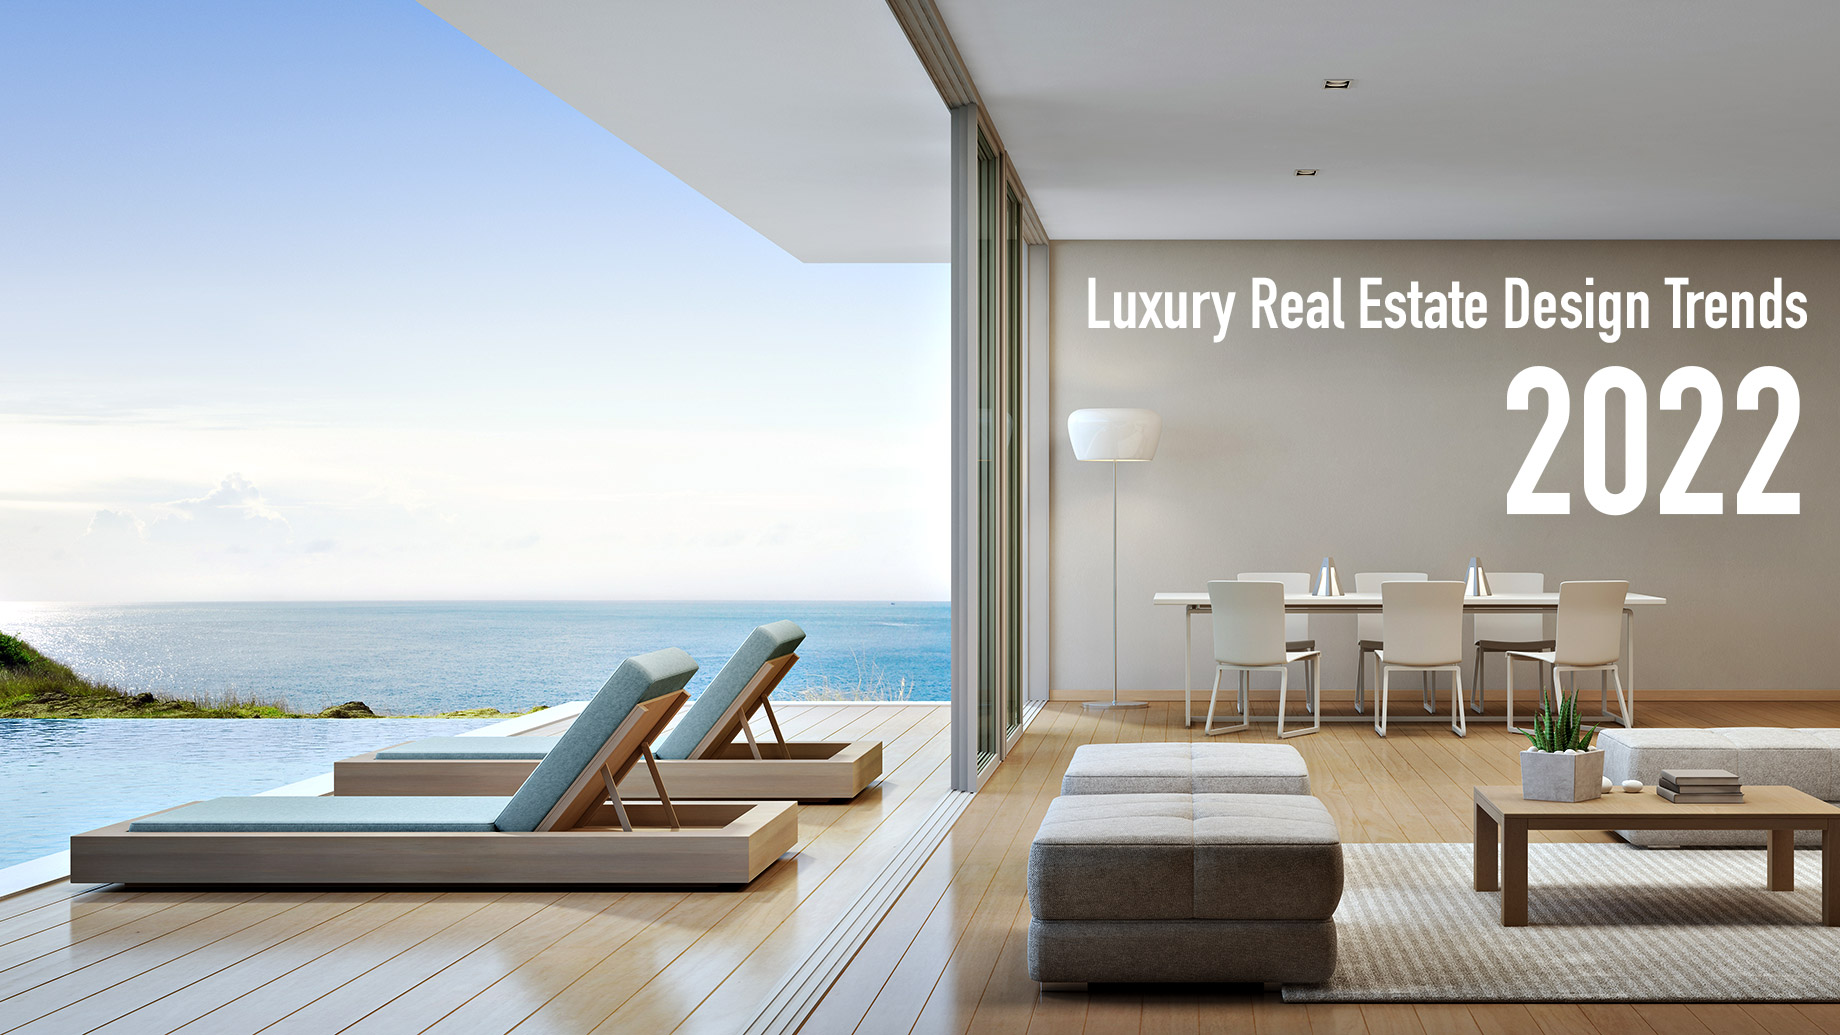 Luxury Real Estate Design Trends For 2022